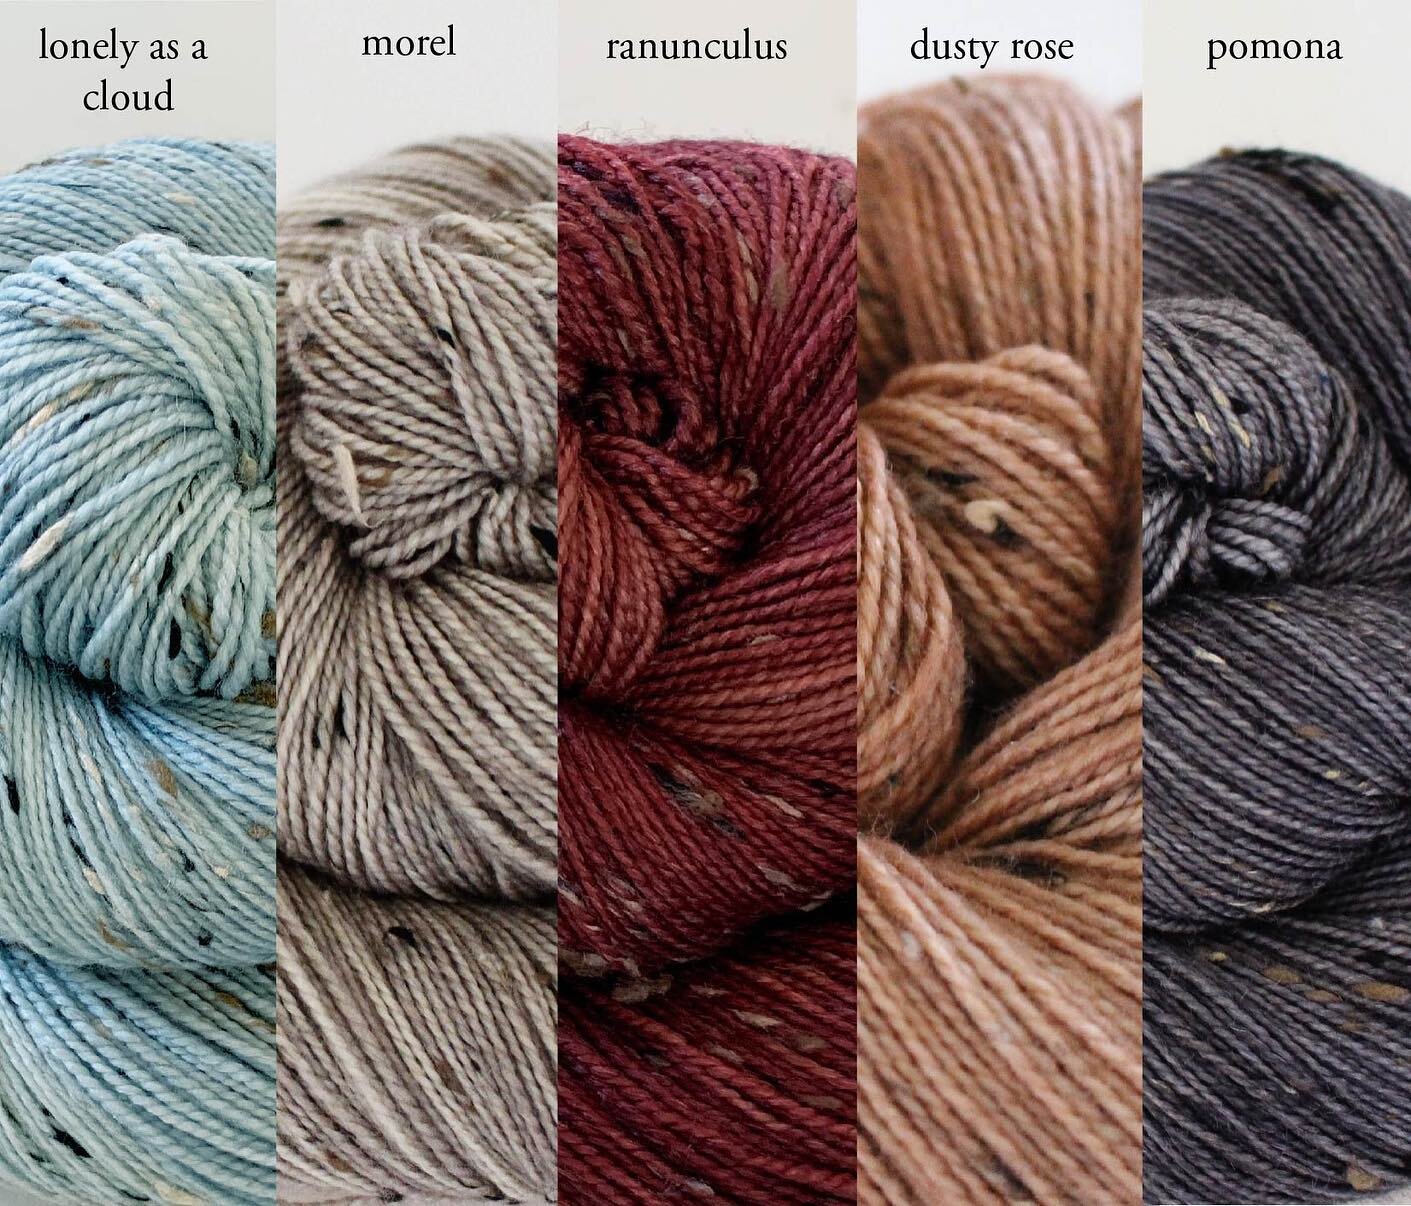 There will be a big Sweet Sparrow shop update today, Tuesday July 13th, at 4pm eastern! Here&rsquo;s a peek at the yarn that will be available. Each base has its own slide&mdash; in order, they&rsquo;re House Wren, Swift, Feather, Goldfinch, and Phoe